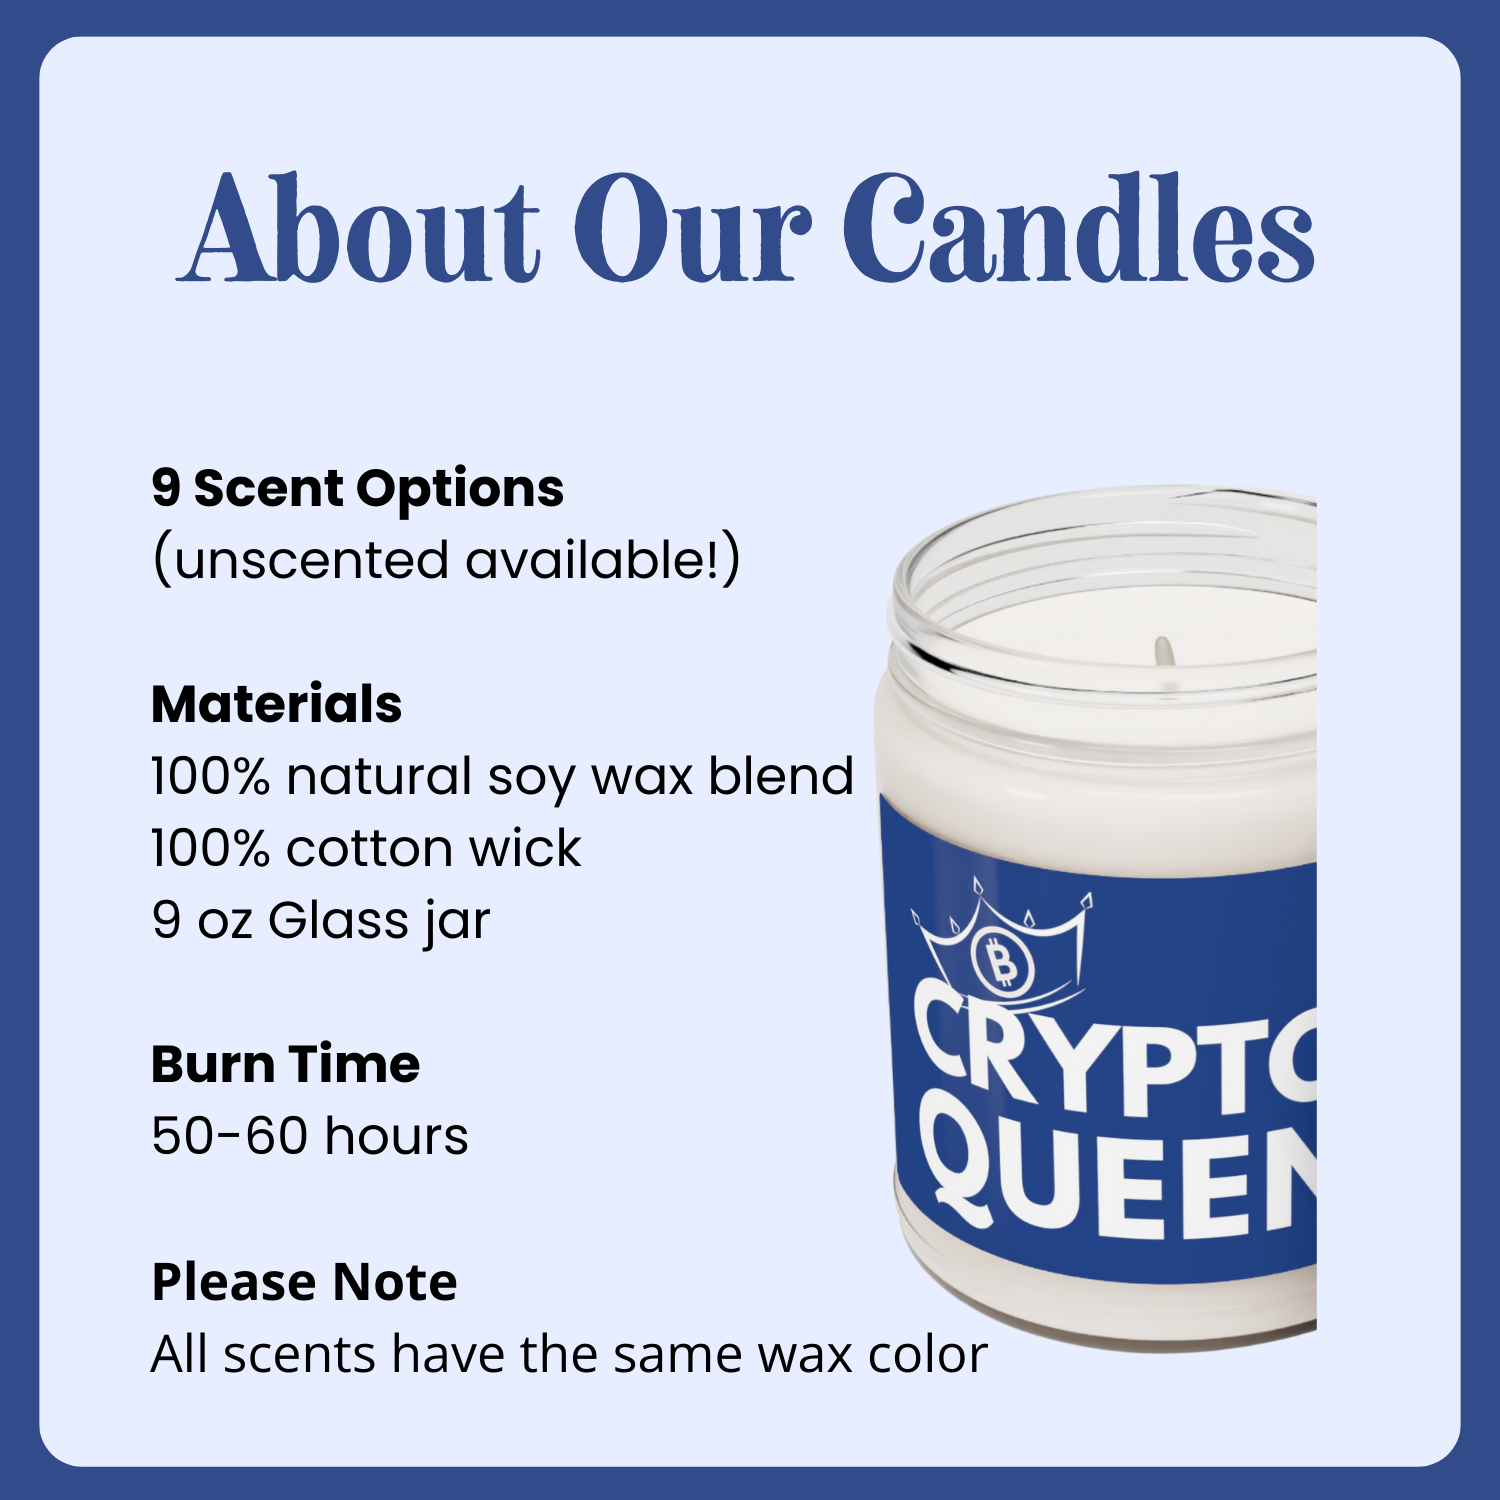 Nine scents, 100% natural soy wax blend, wax color is white, burn time 50-60 hours